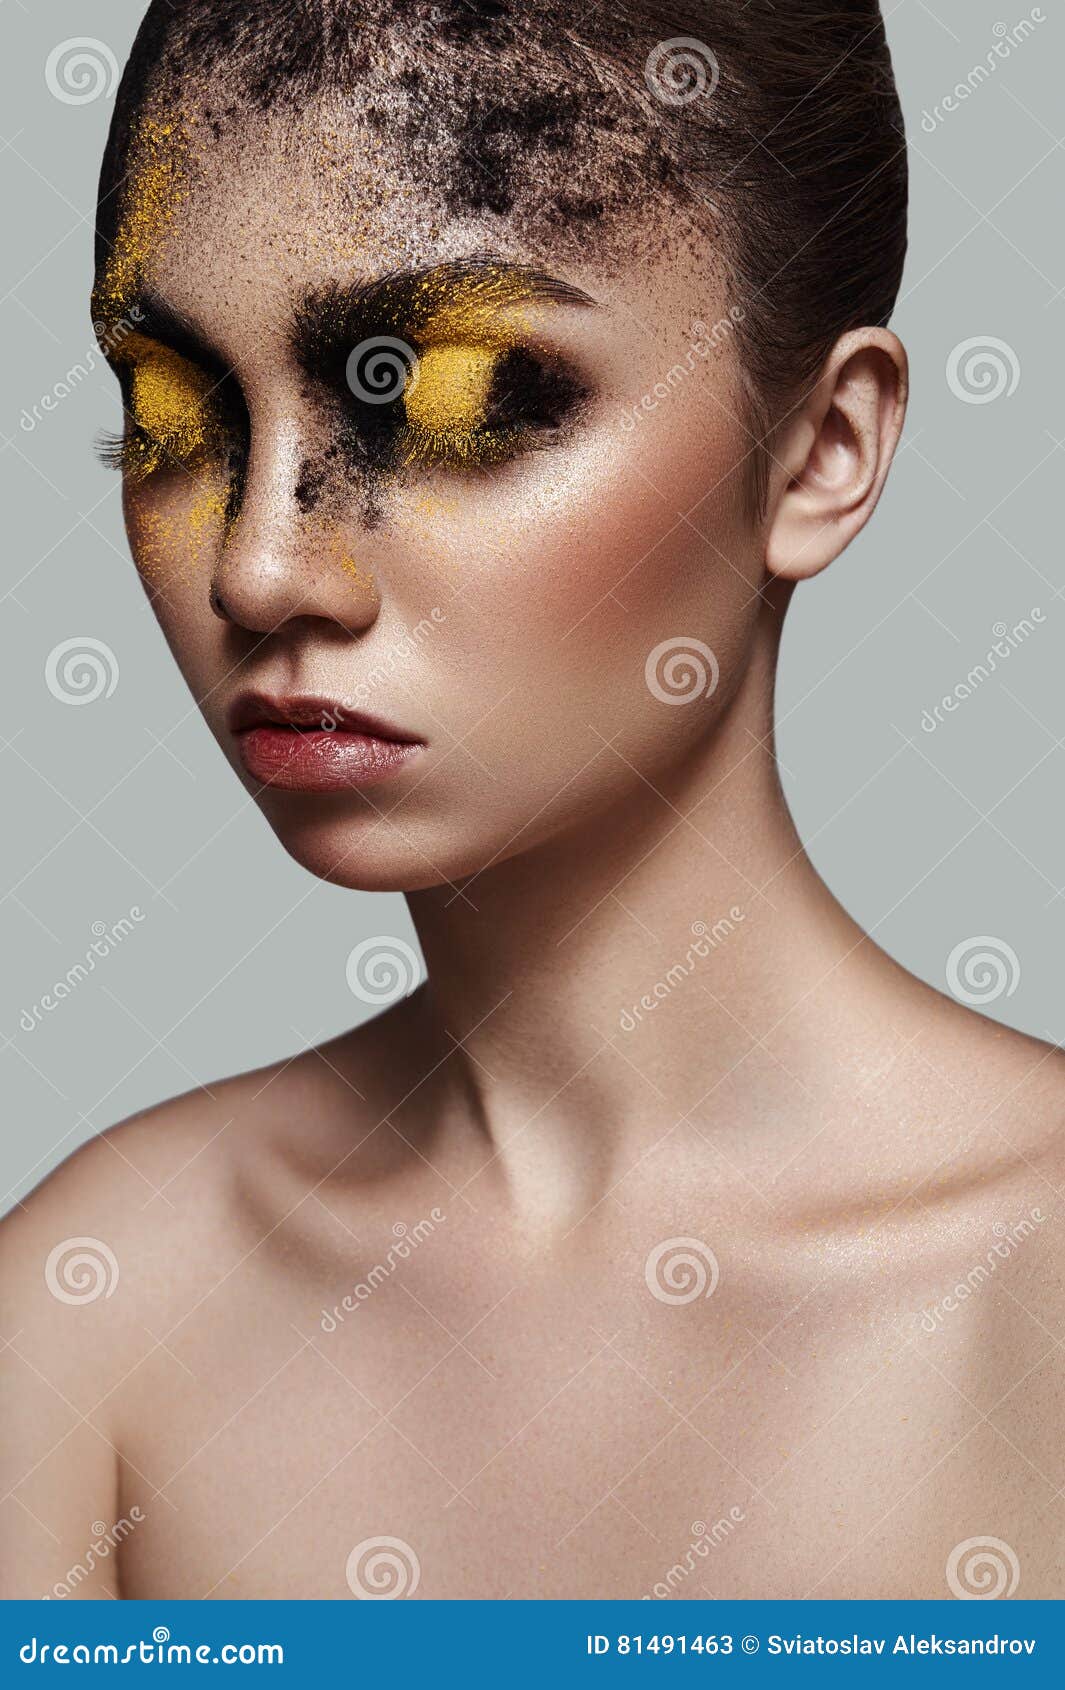 Black and white makeup. stock image. Image of creativity - 39251791